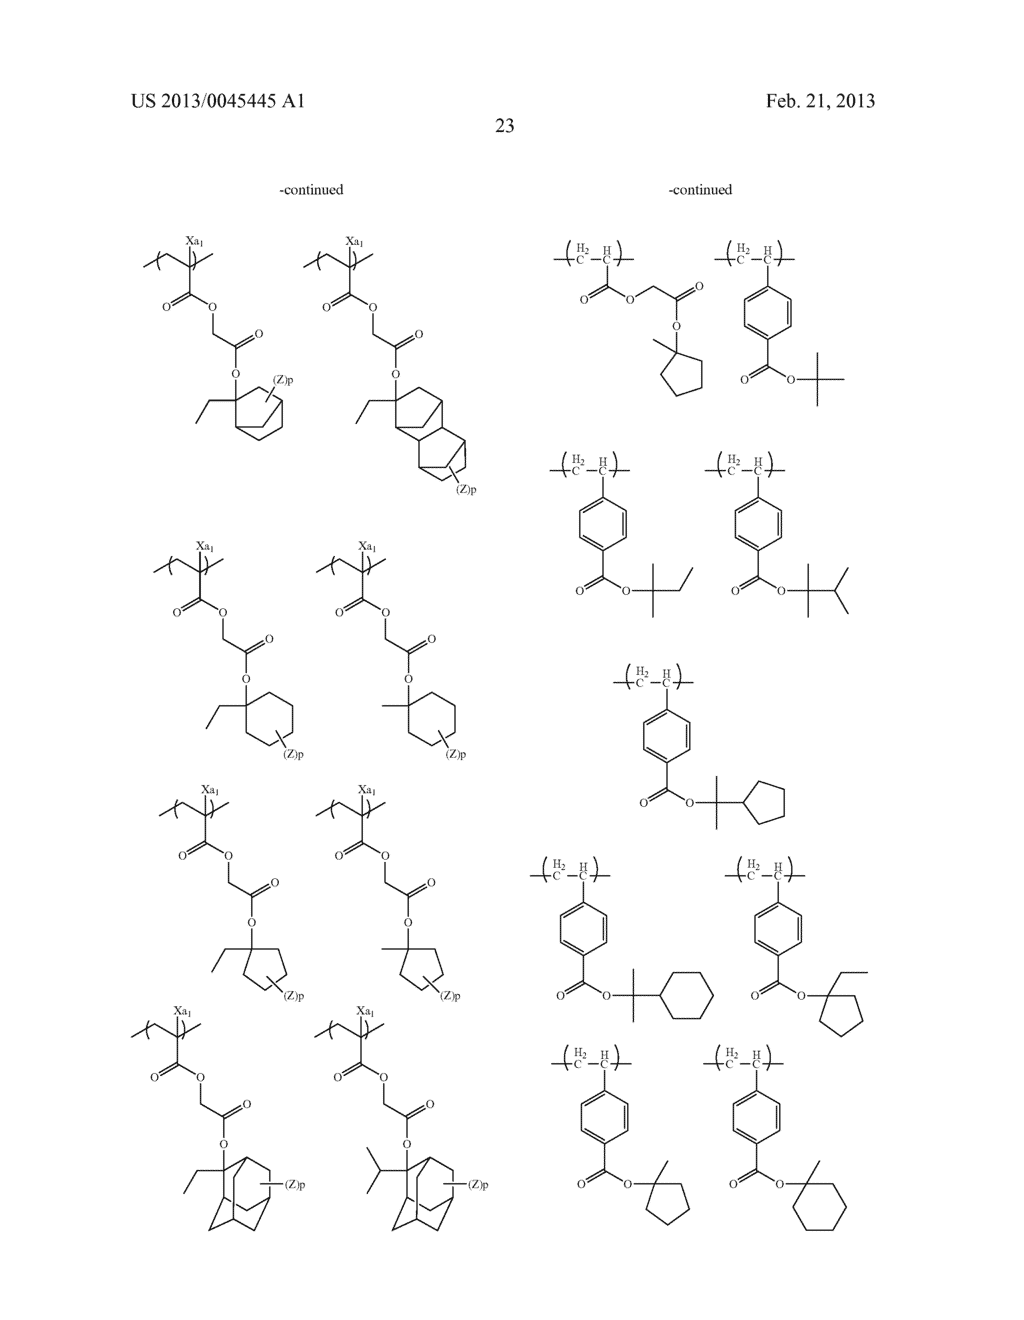 ACTINIC-RAY- OR RADIATION-SENSITIVE RESIN COMPOSITION, ACTINIC-RAY- OR     RADIATION-SENSITIVE RESIN FILM THEREFROM AND METHOD OF FORMING PATTERN     USING THE COMPOSITION - diagram, schematic, and image 24